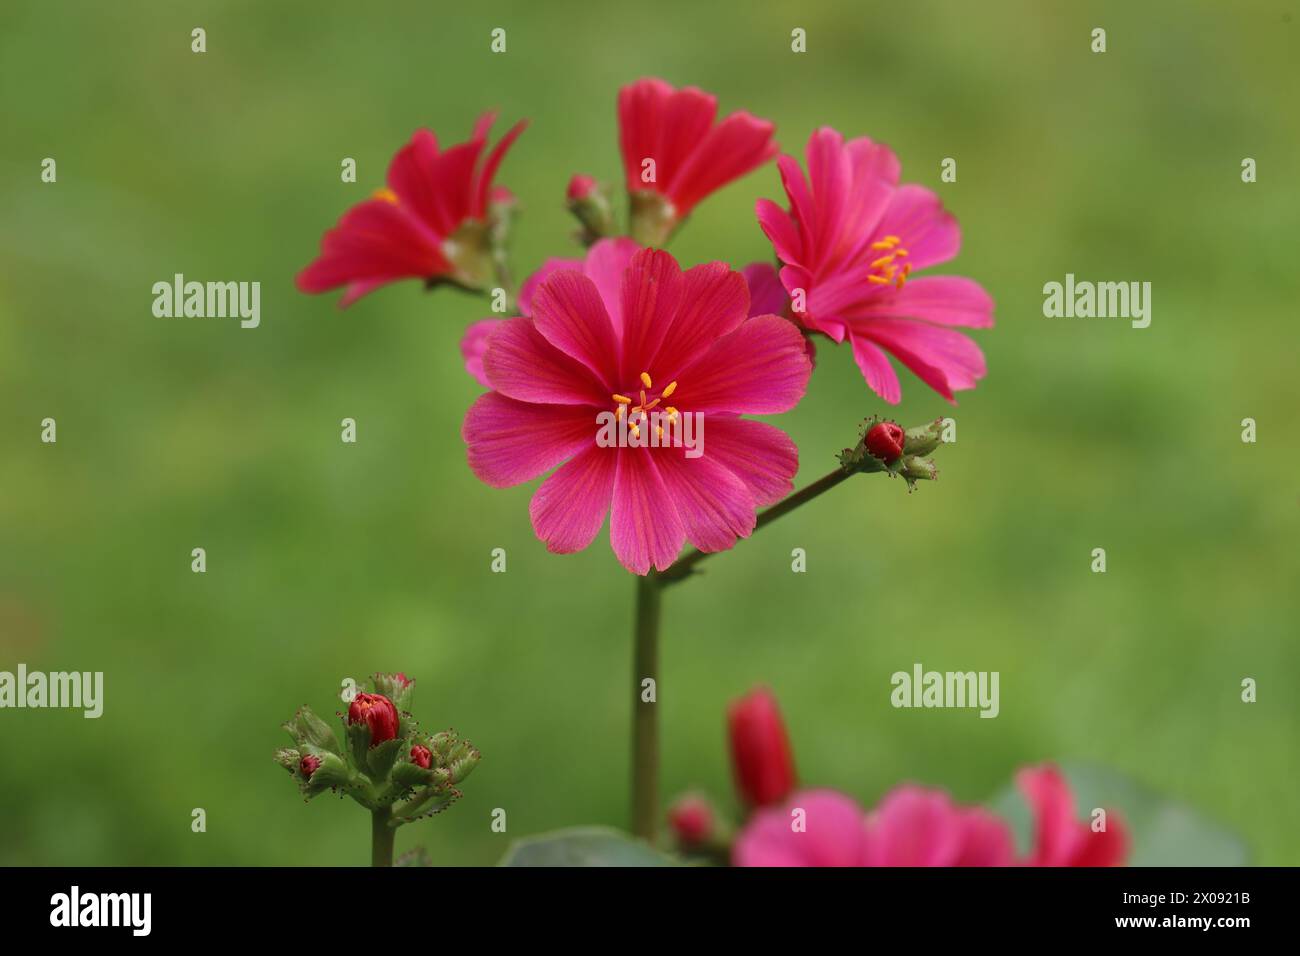 Close-up view of beautiful salmon-colored flowers of a Lewisia cotyledon eldora against a green blurred background Stock Photo